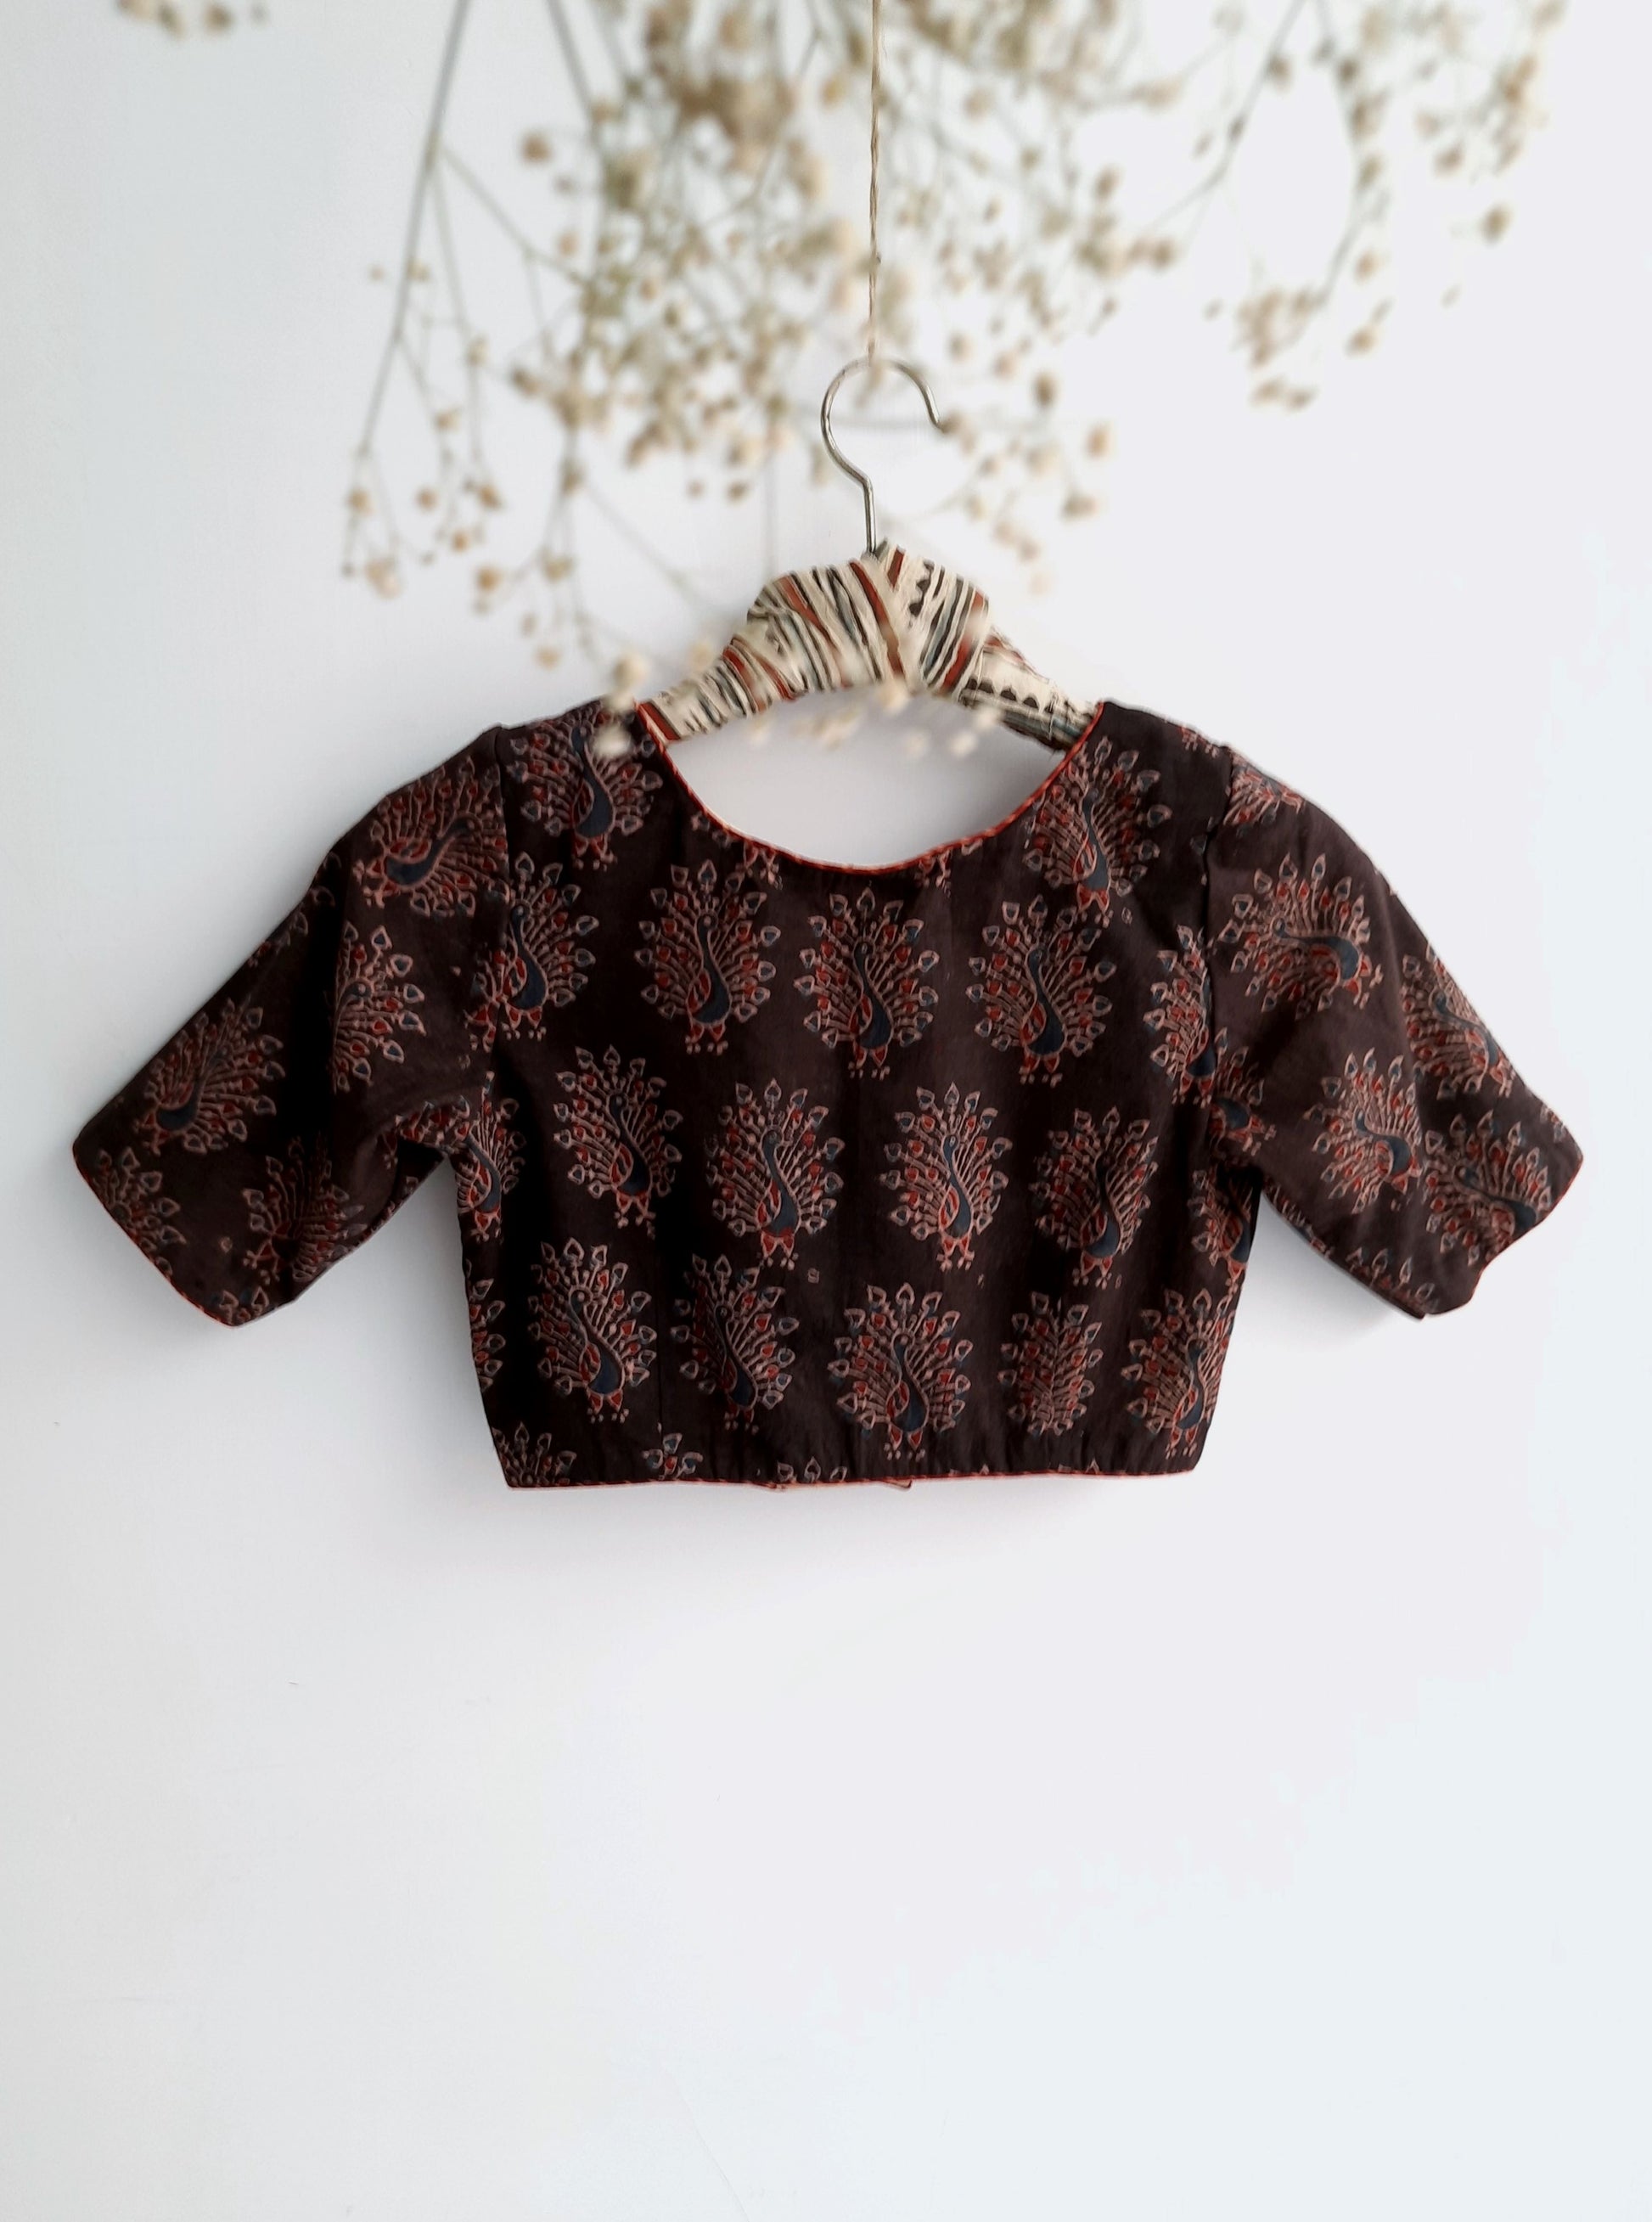 Ajrakh hand block print blouse in brown color, Brown ajrakh prints blouse, Handmade ajrakh blouse, Sale